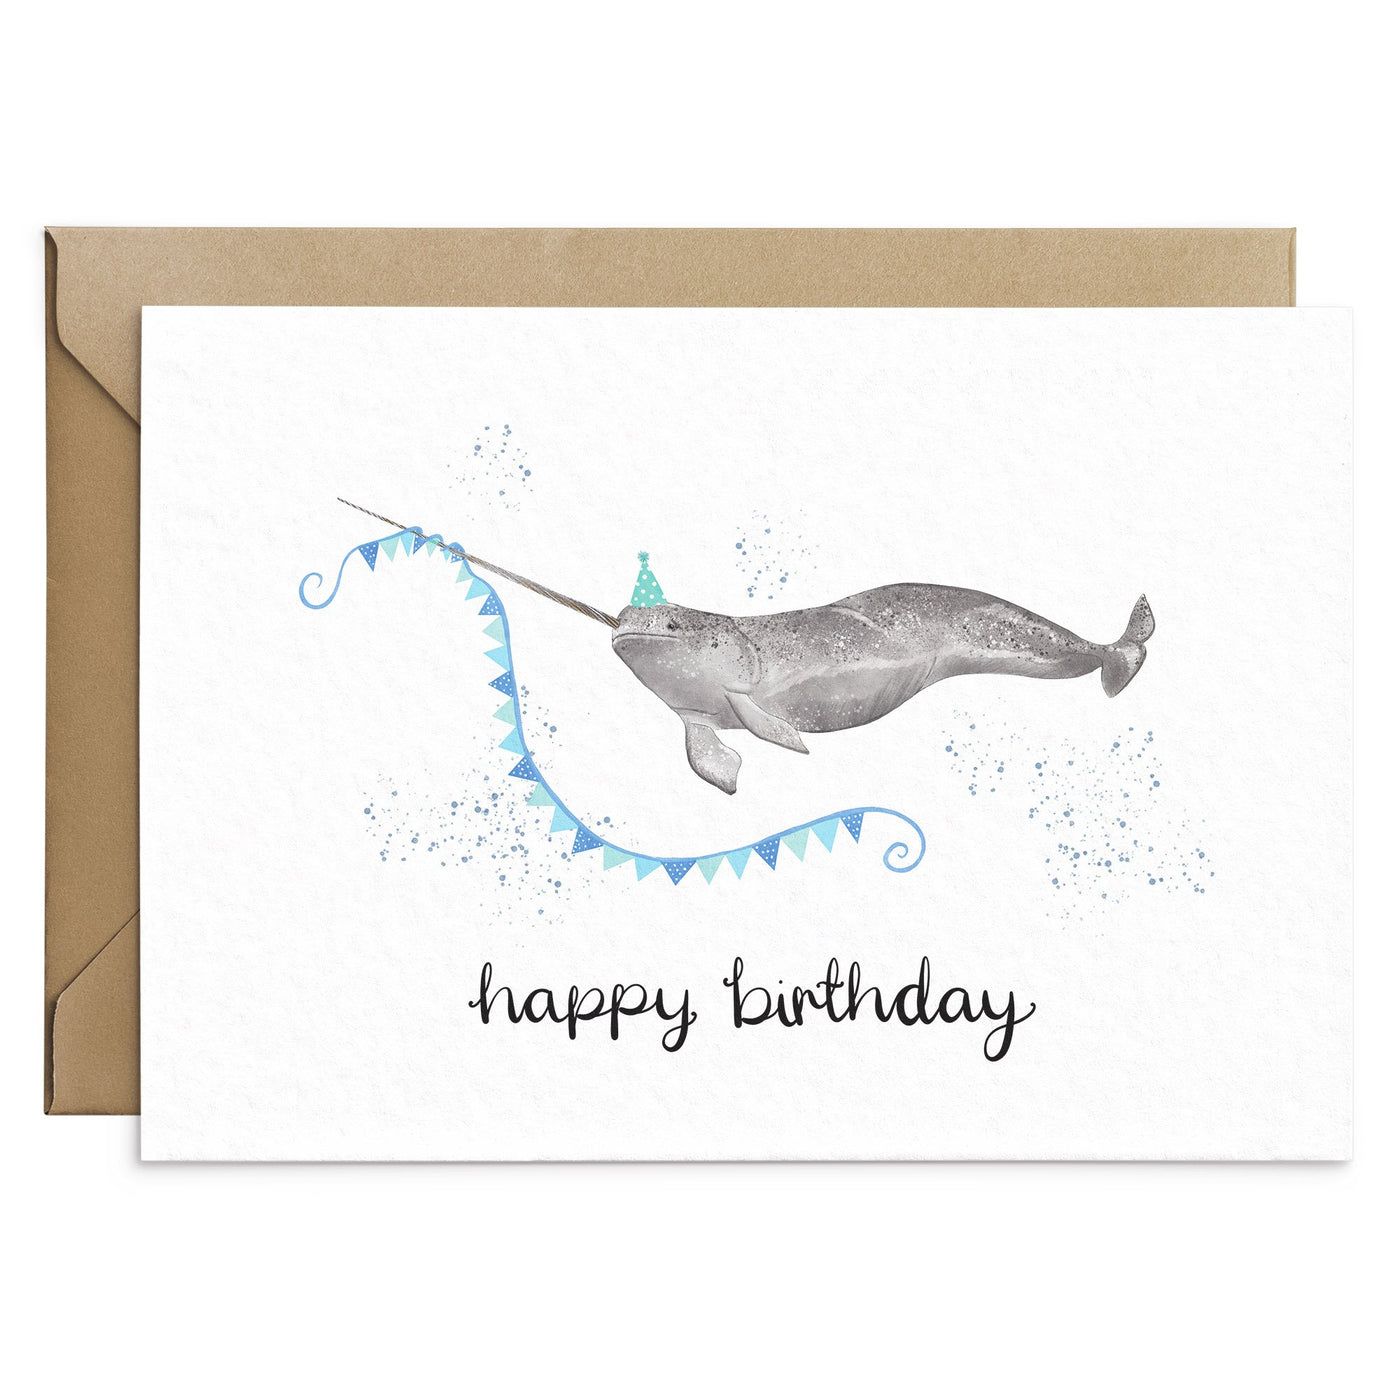 Narwhal Birthday Card - Poppins & Co.